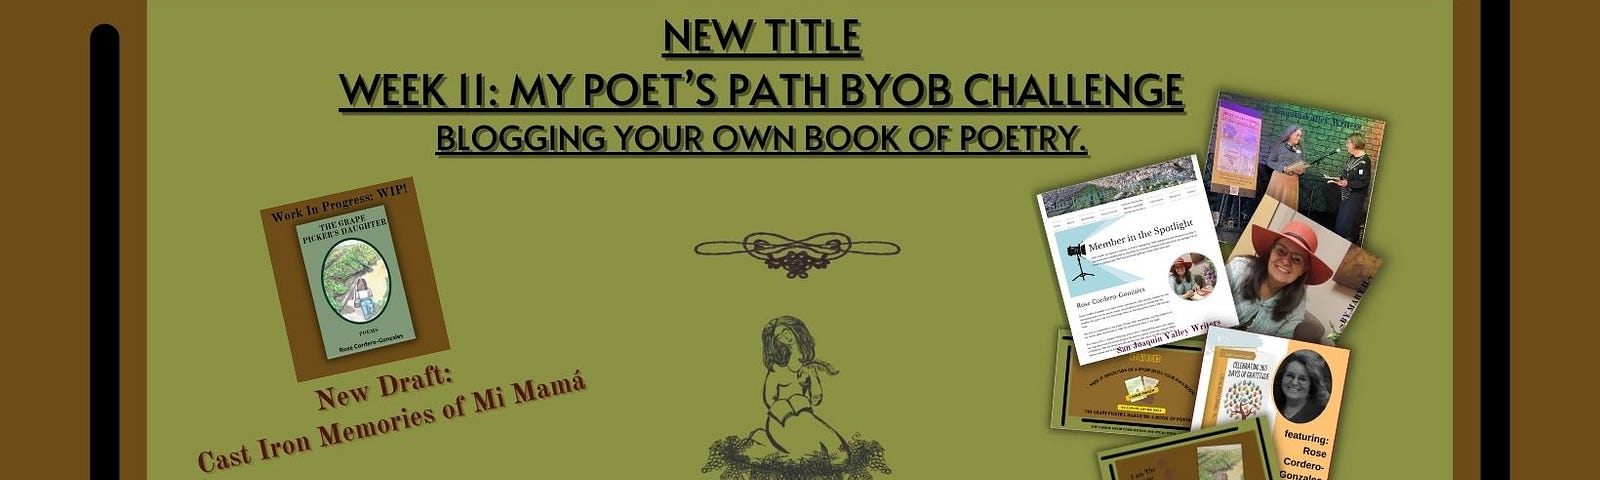 Week 11: My Poet’s Path BYOB Challenge
 Blogging your own book of poetry.
 Today’s Topic:
 Tip from the Poet’s Path: Writing it in my own words.